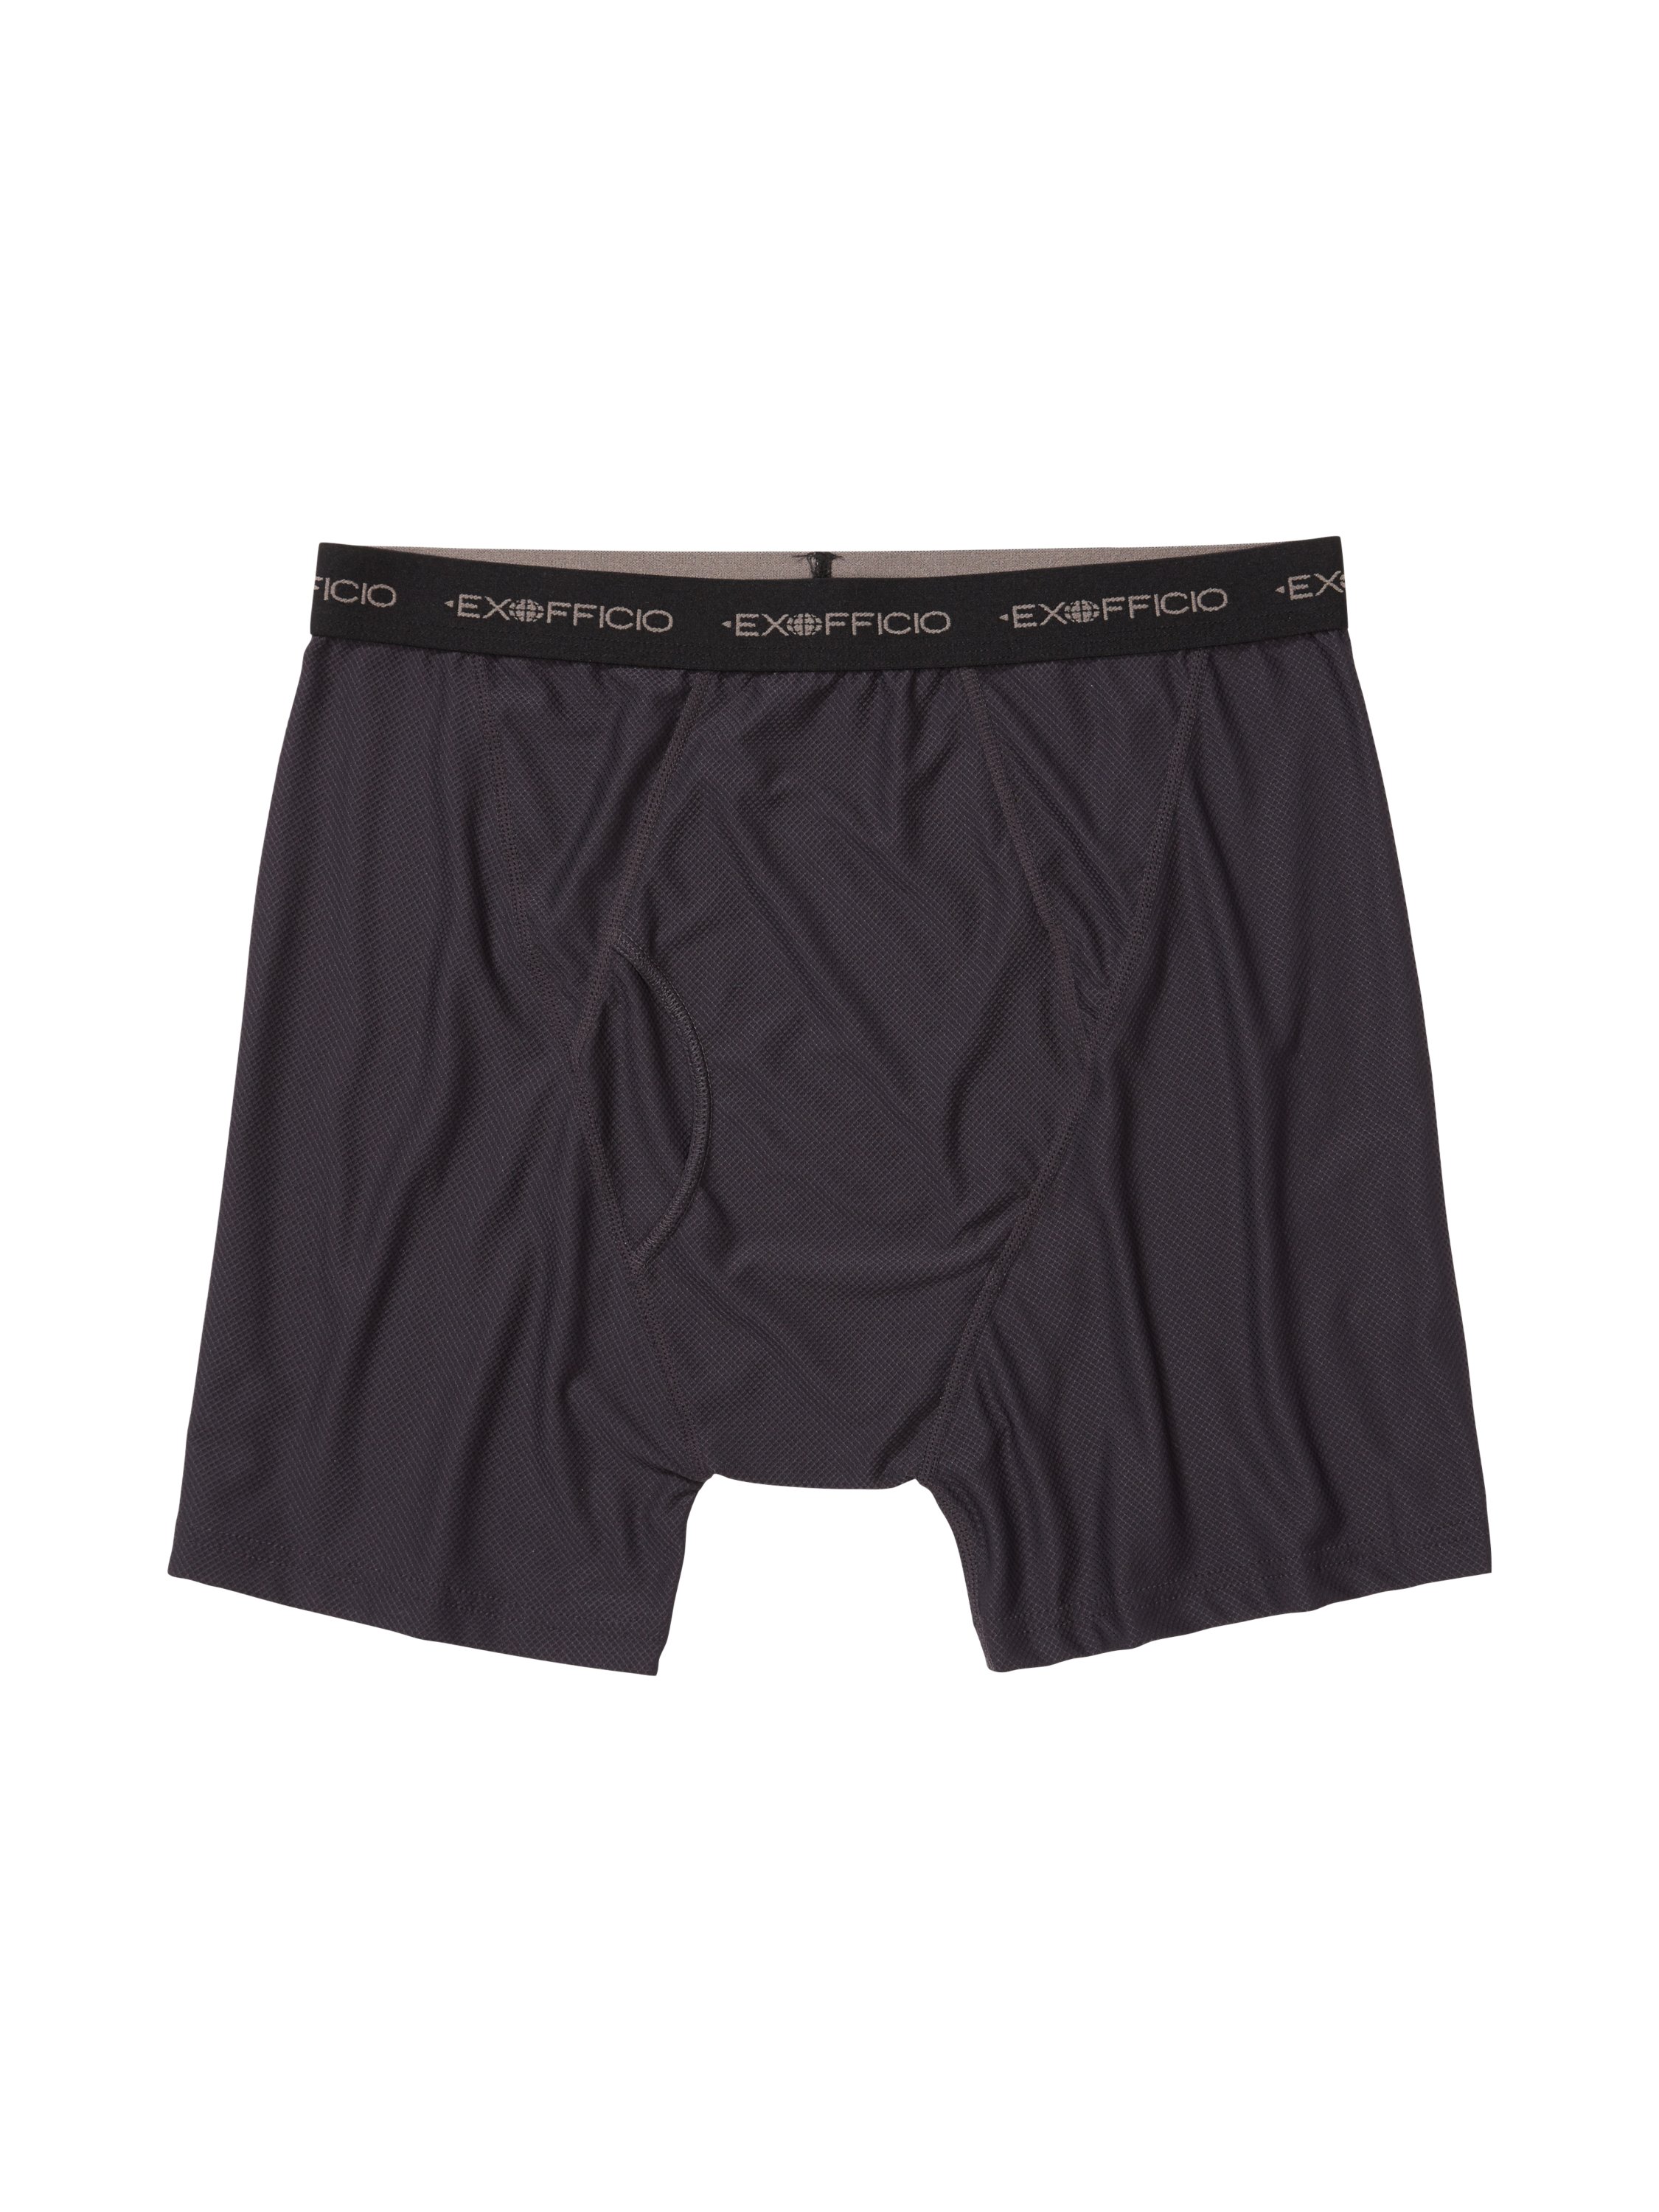 M Give-N-Go® 1.0 Boxer Brief